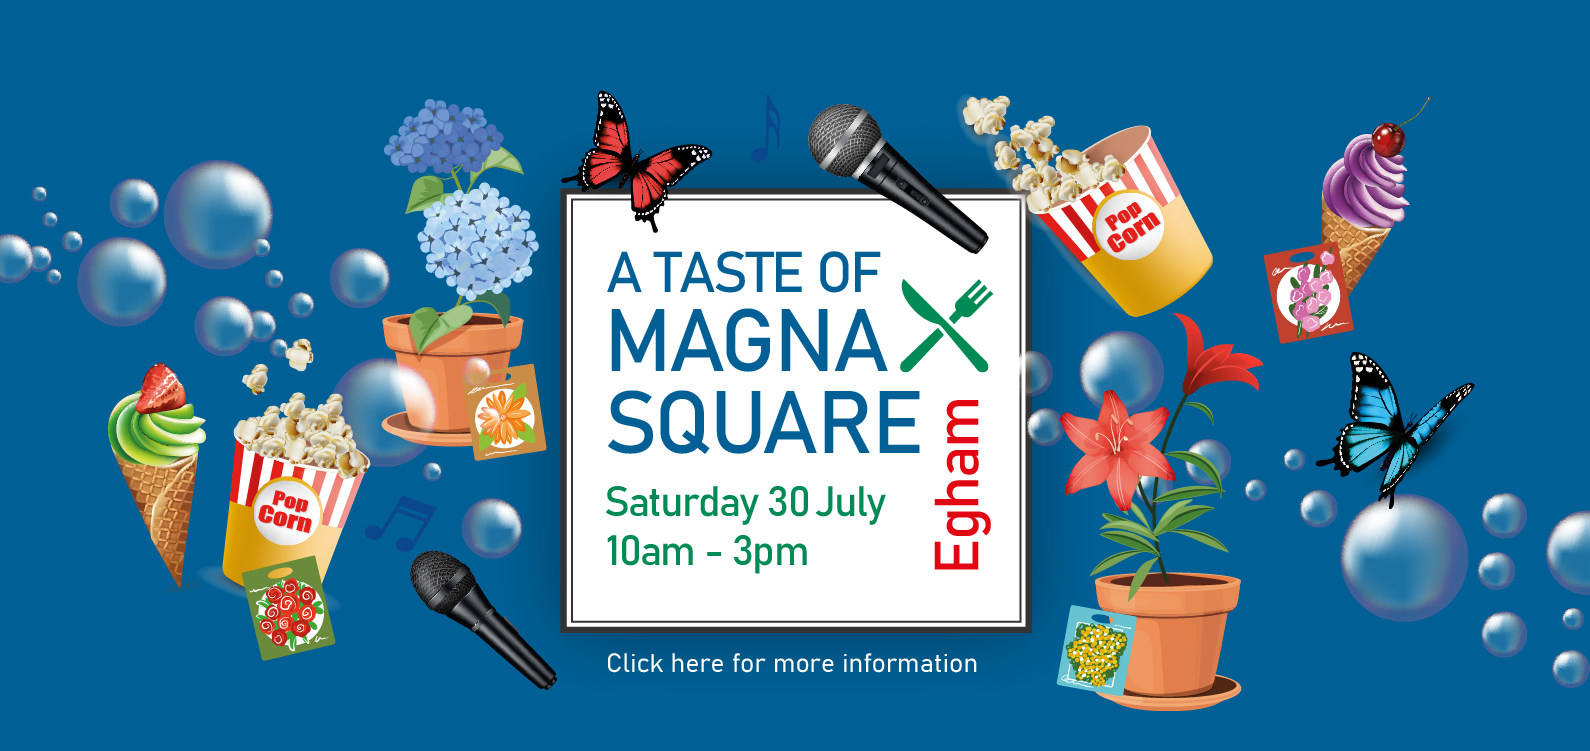 A blue banner with copy that reads experience Magna Square, Saturday 30 July, Egham, 10am to 3pm. The design shows popcorn, plant pots and butterflies to indicate some of the activities on offer.